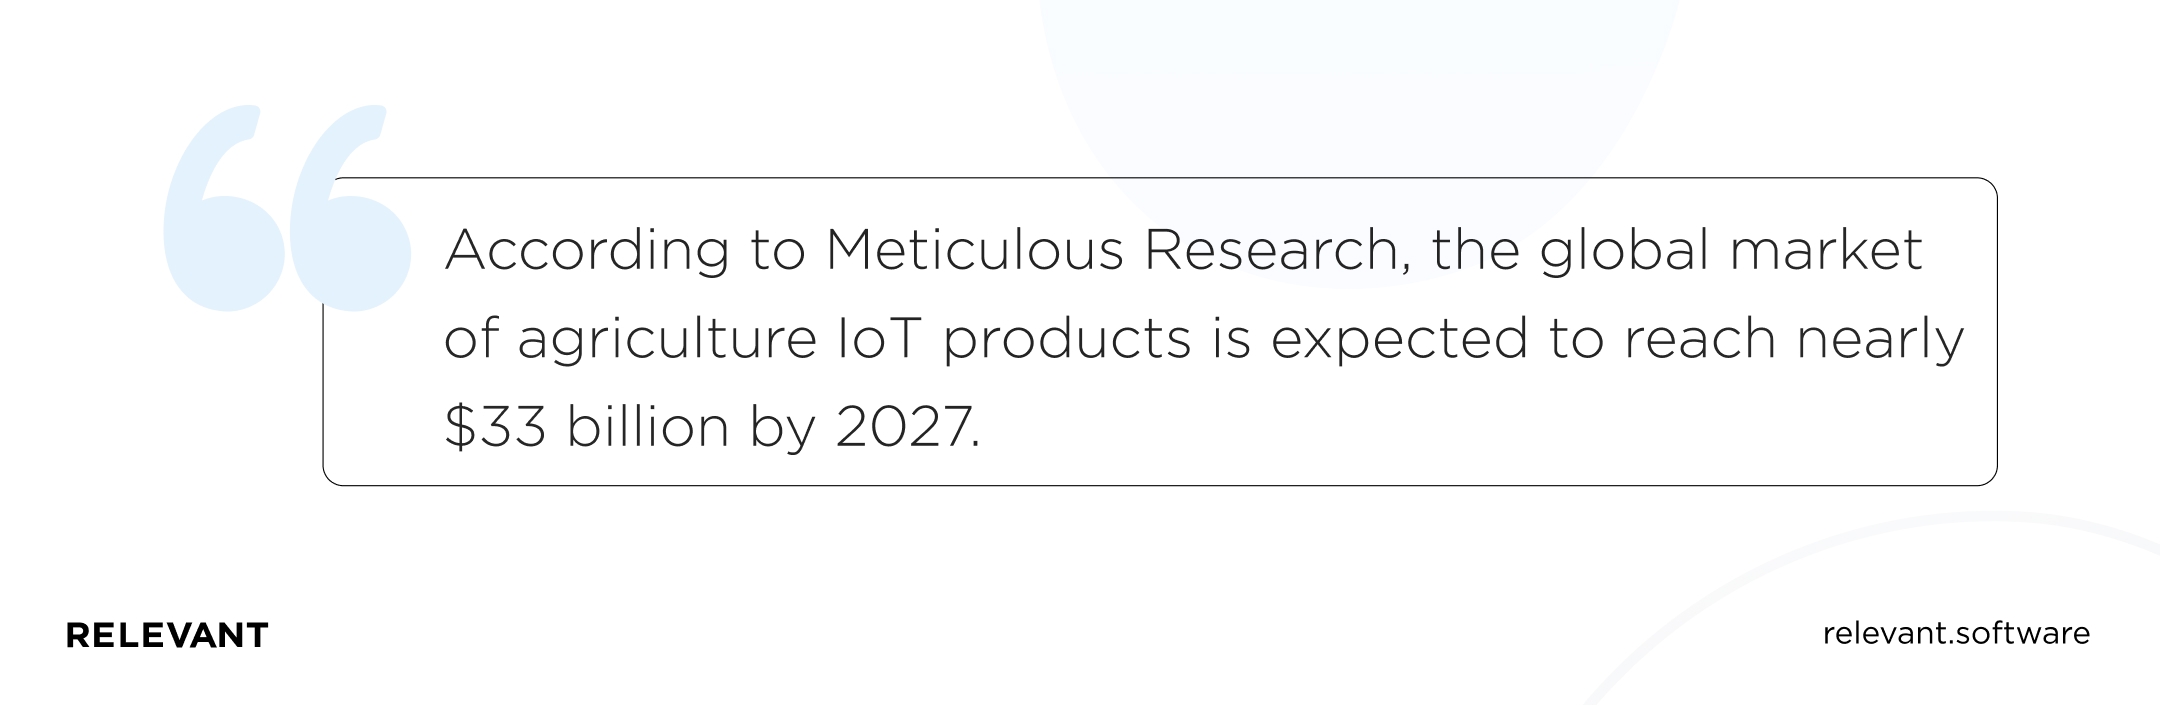 According to Meticulous Research, the global market of agriculture IoT products is expected to reach nearly  billion by 2027.